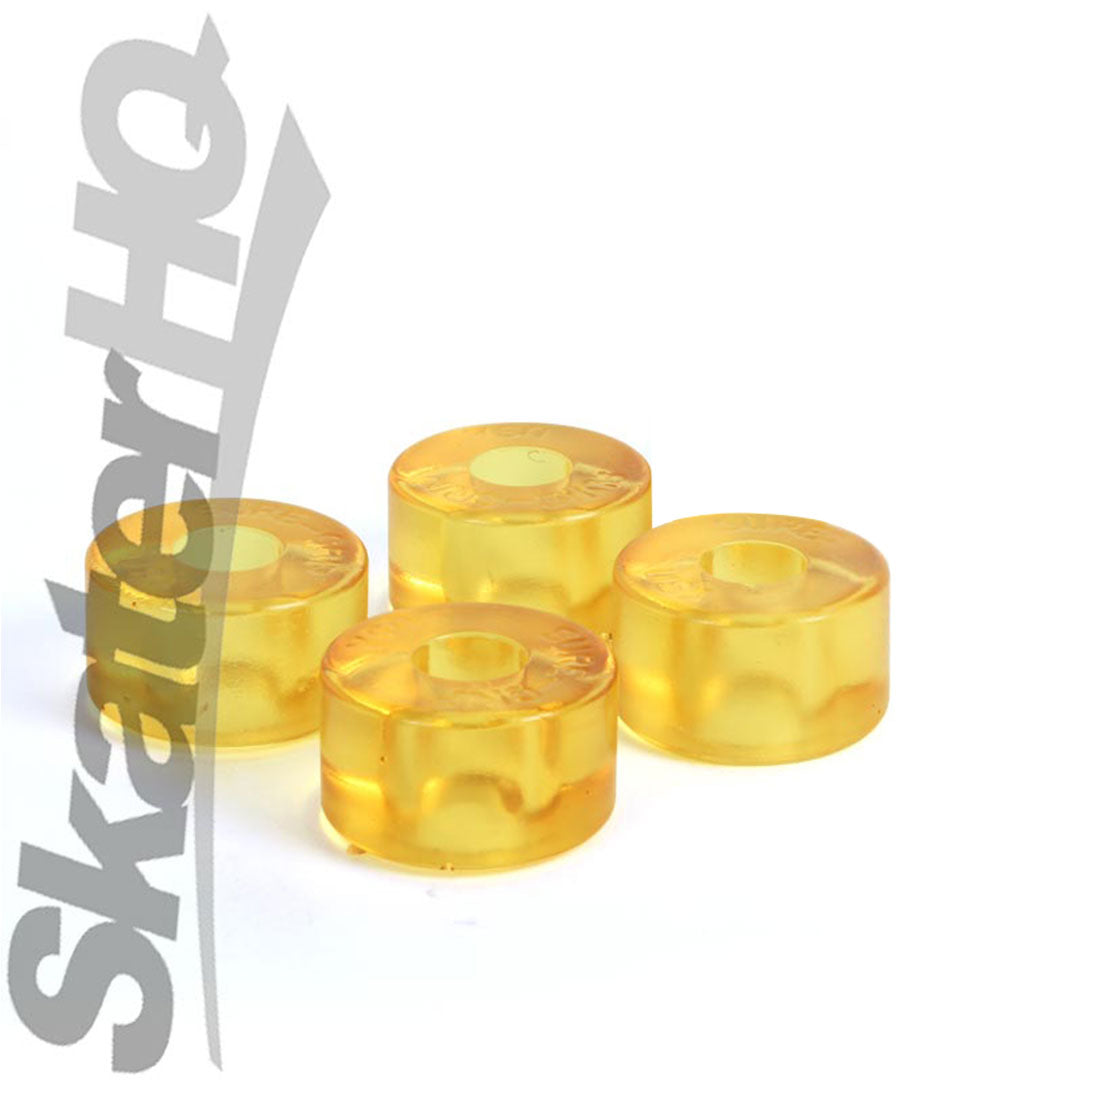 Sure-Grip Barrel Cushions 79a 4pk - Yellow Roller Skate Hardware and Parts